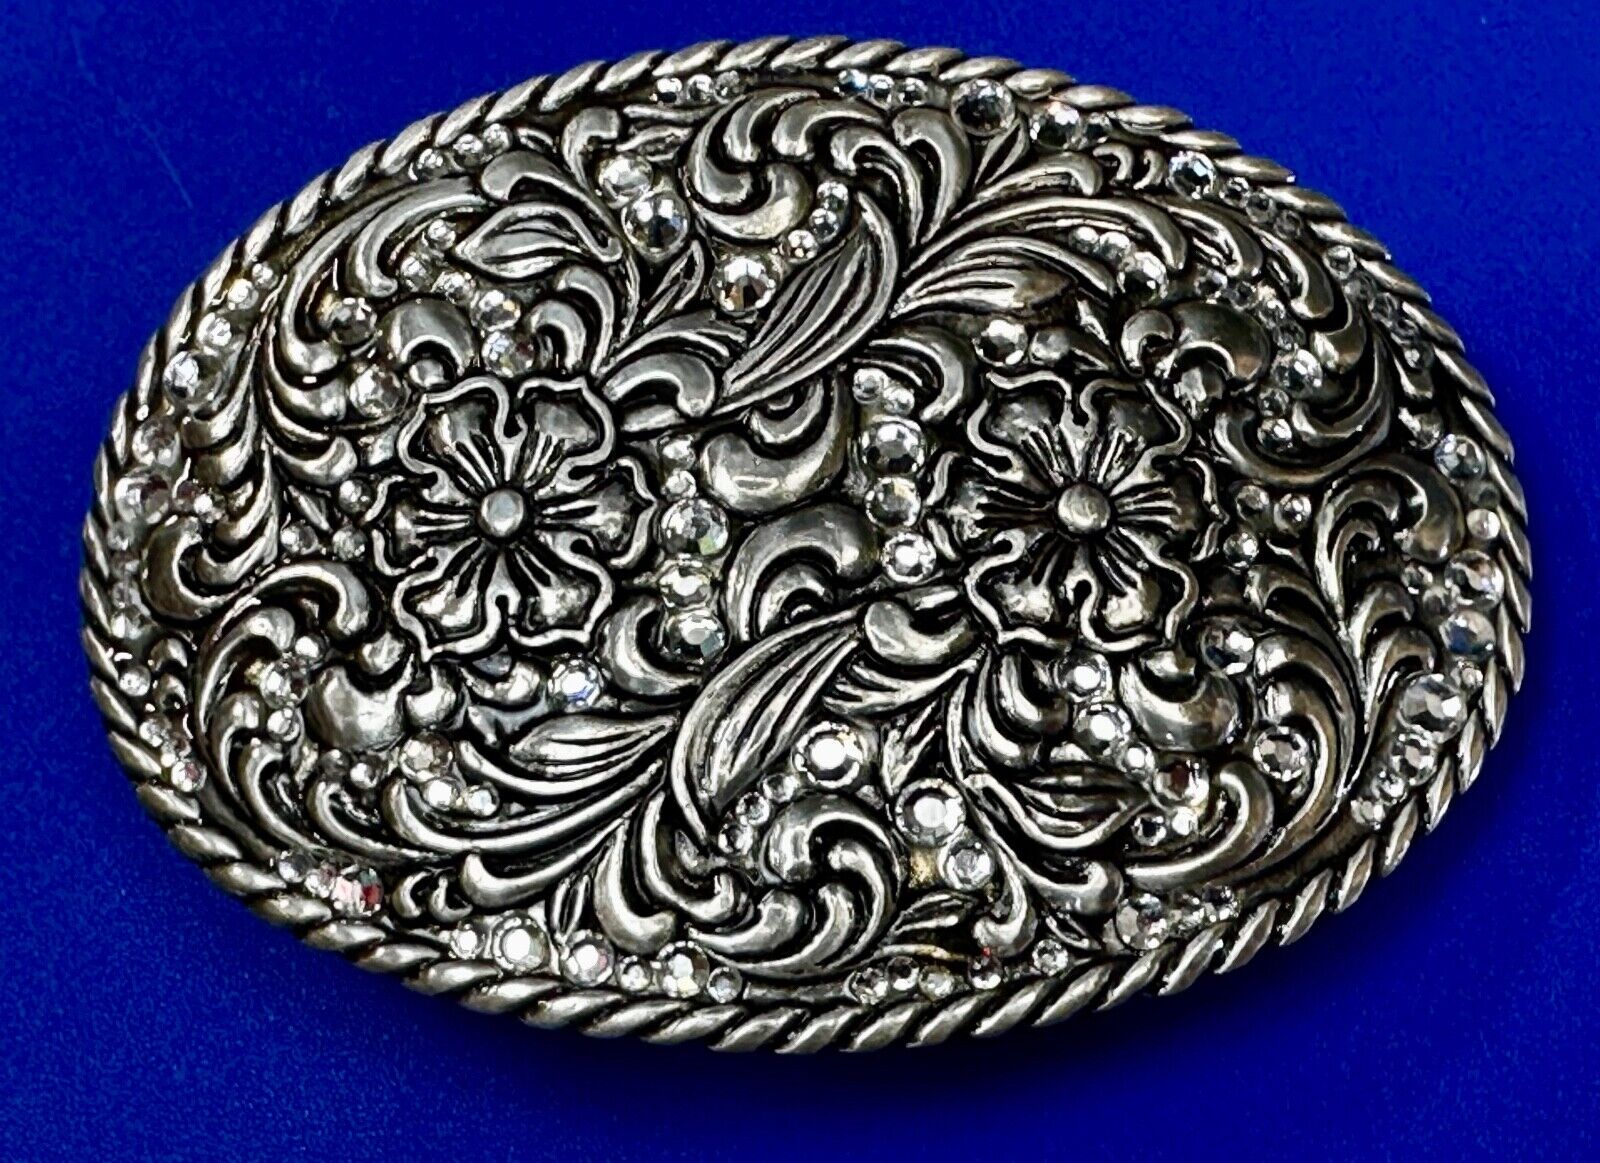 Rhinestone covered western silver tone oval floral Belt Buckle by Nocona